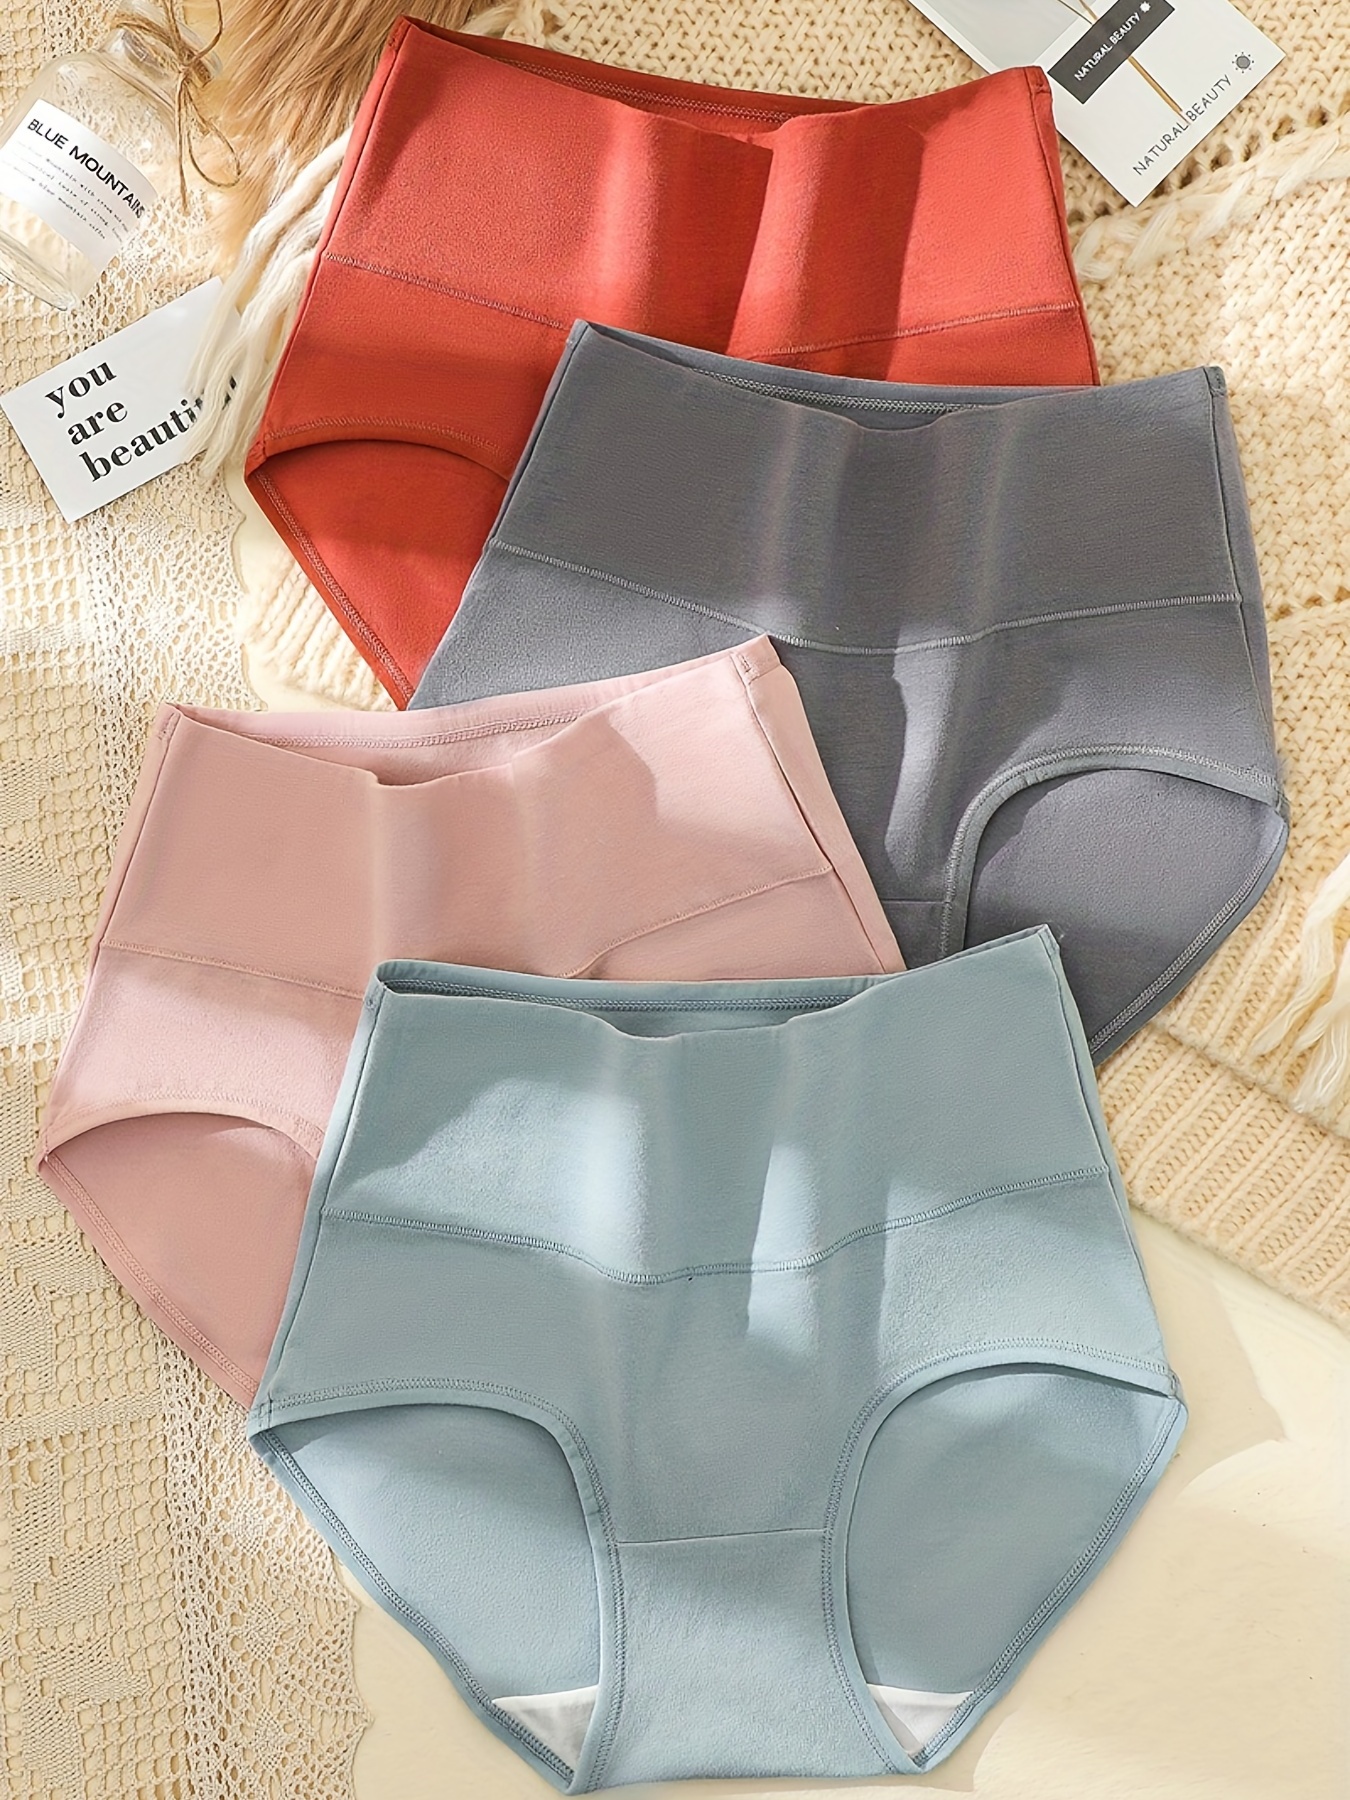 6pcs Simple Textured Briefs, Comfy & Breathable Stretchy Intimates Panties,  Women's Lingerie & Underwear